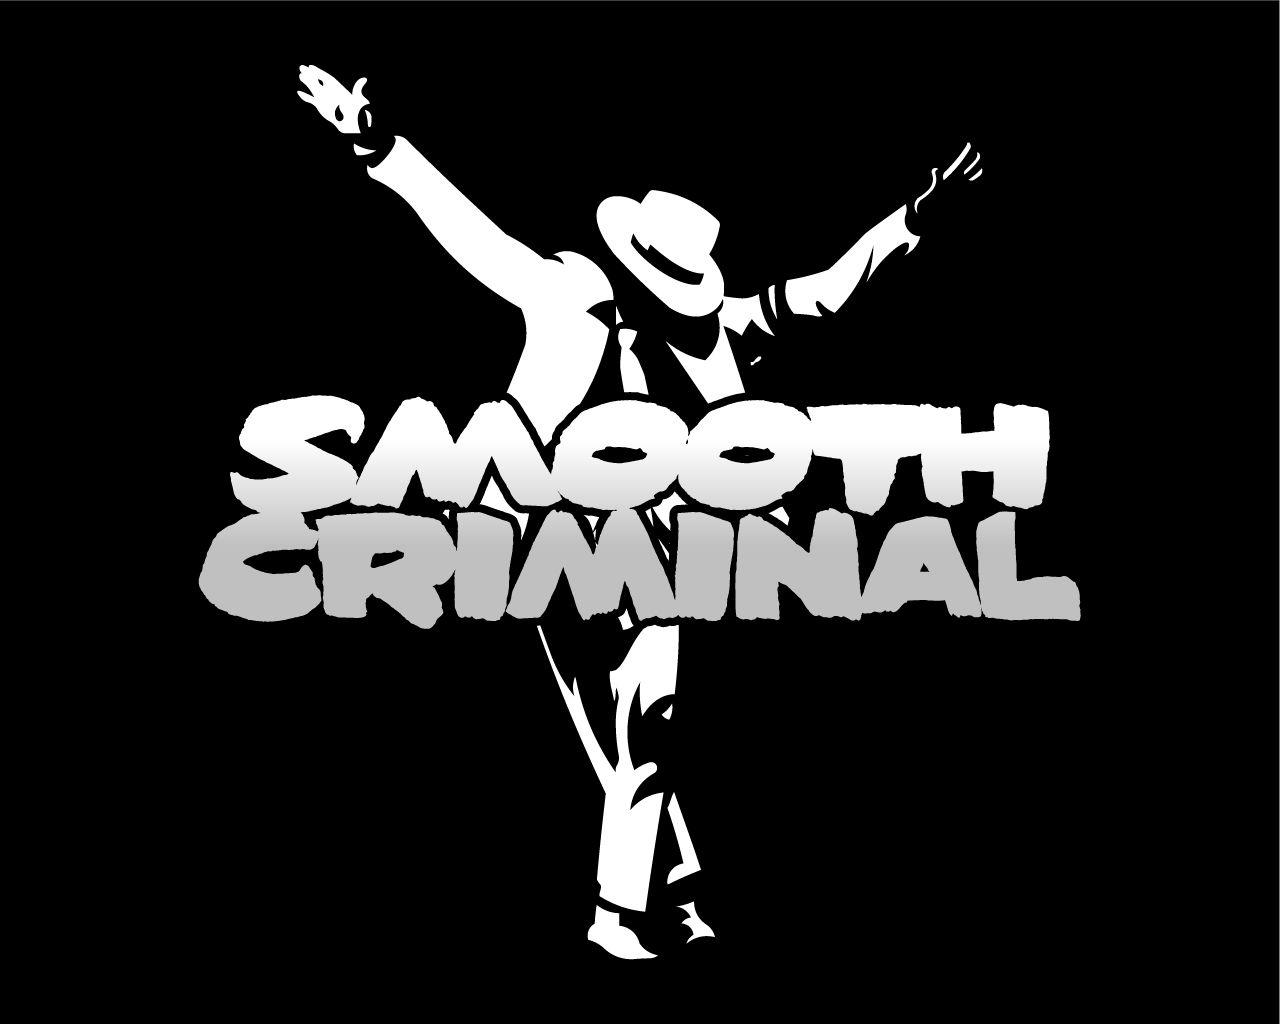 The Smooth Criminal